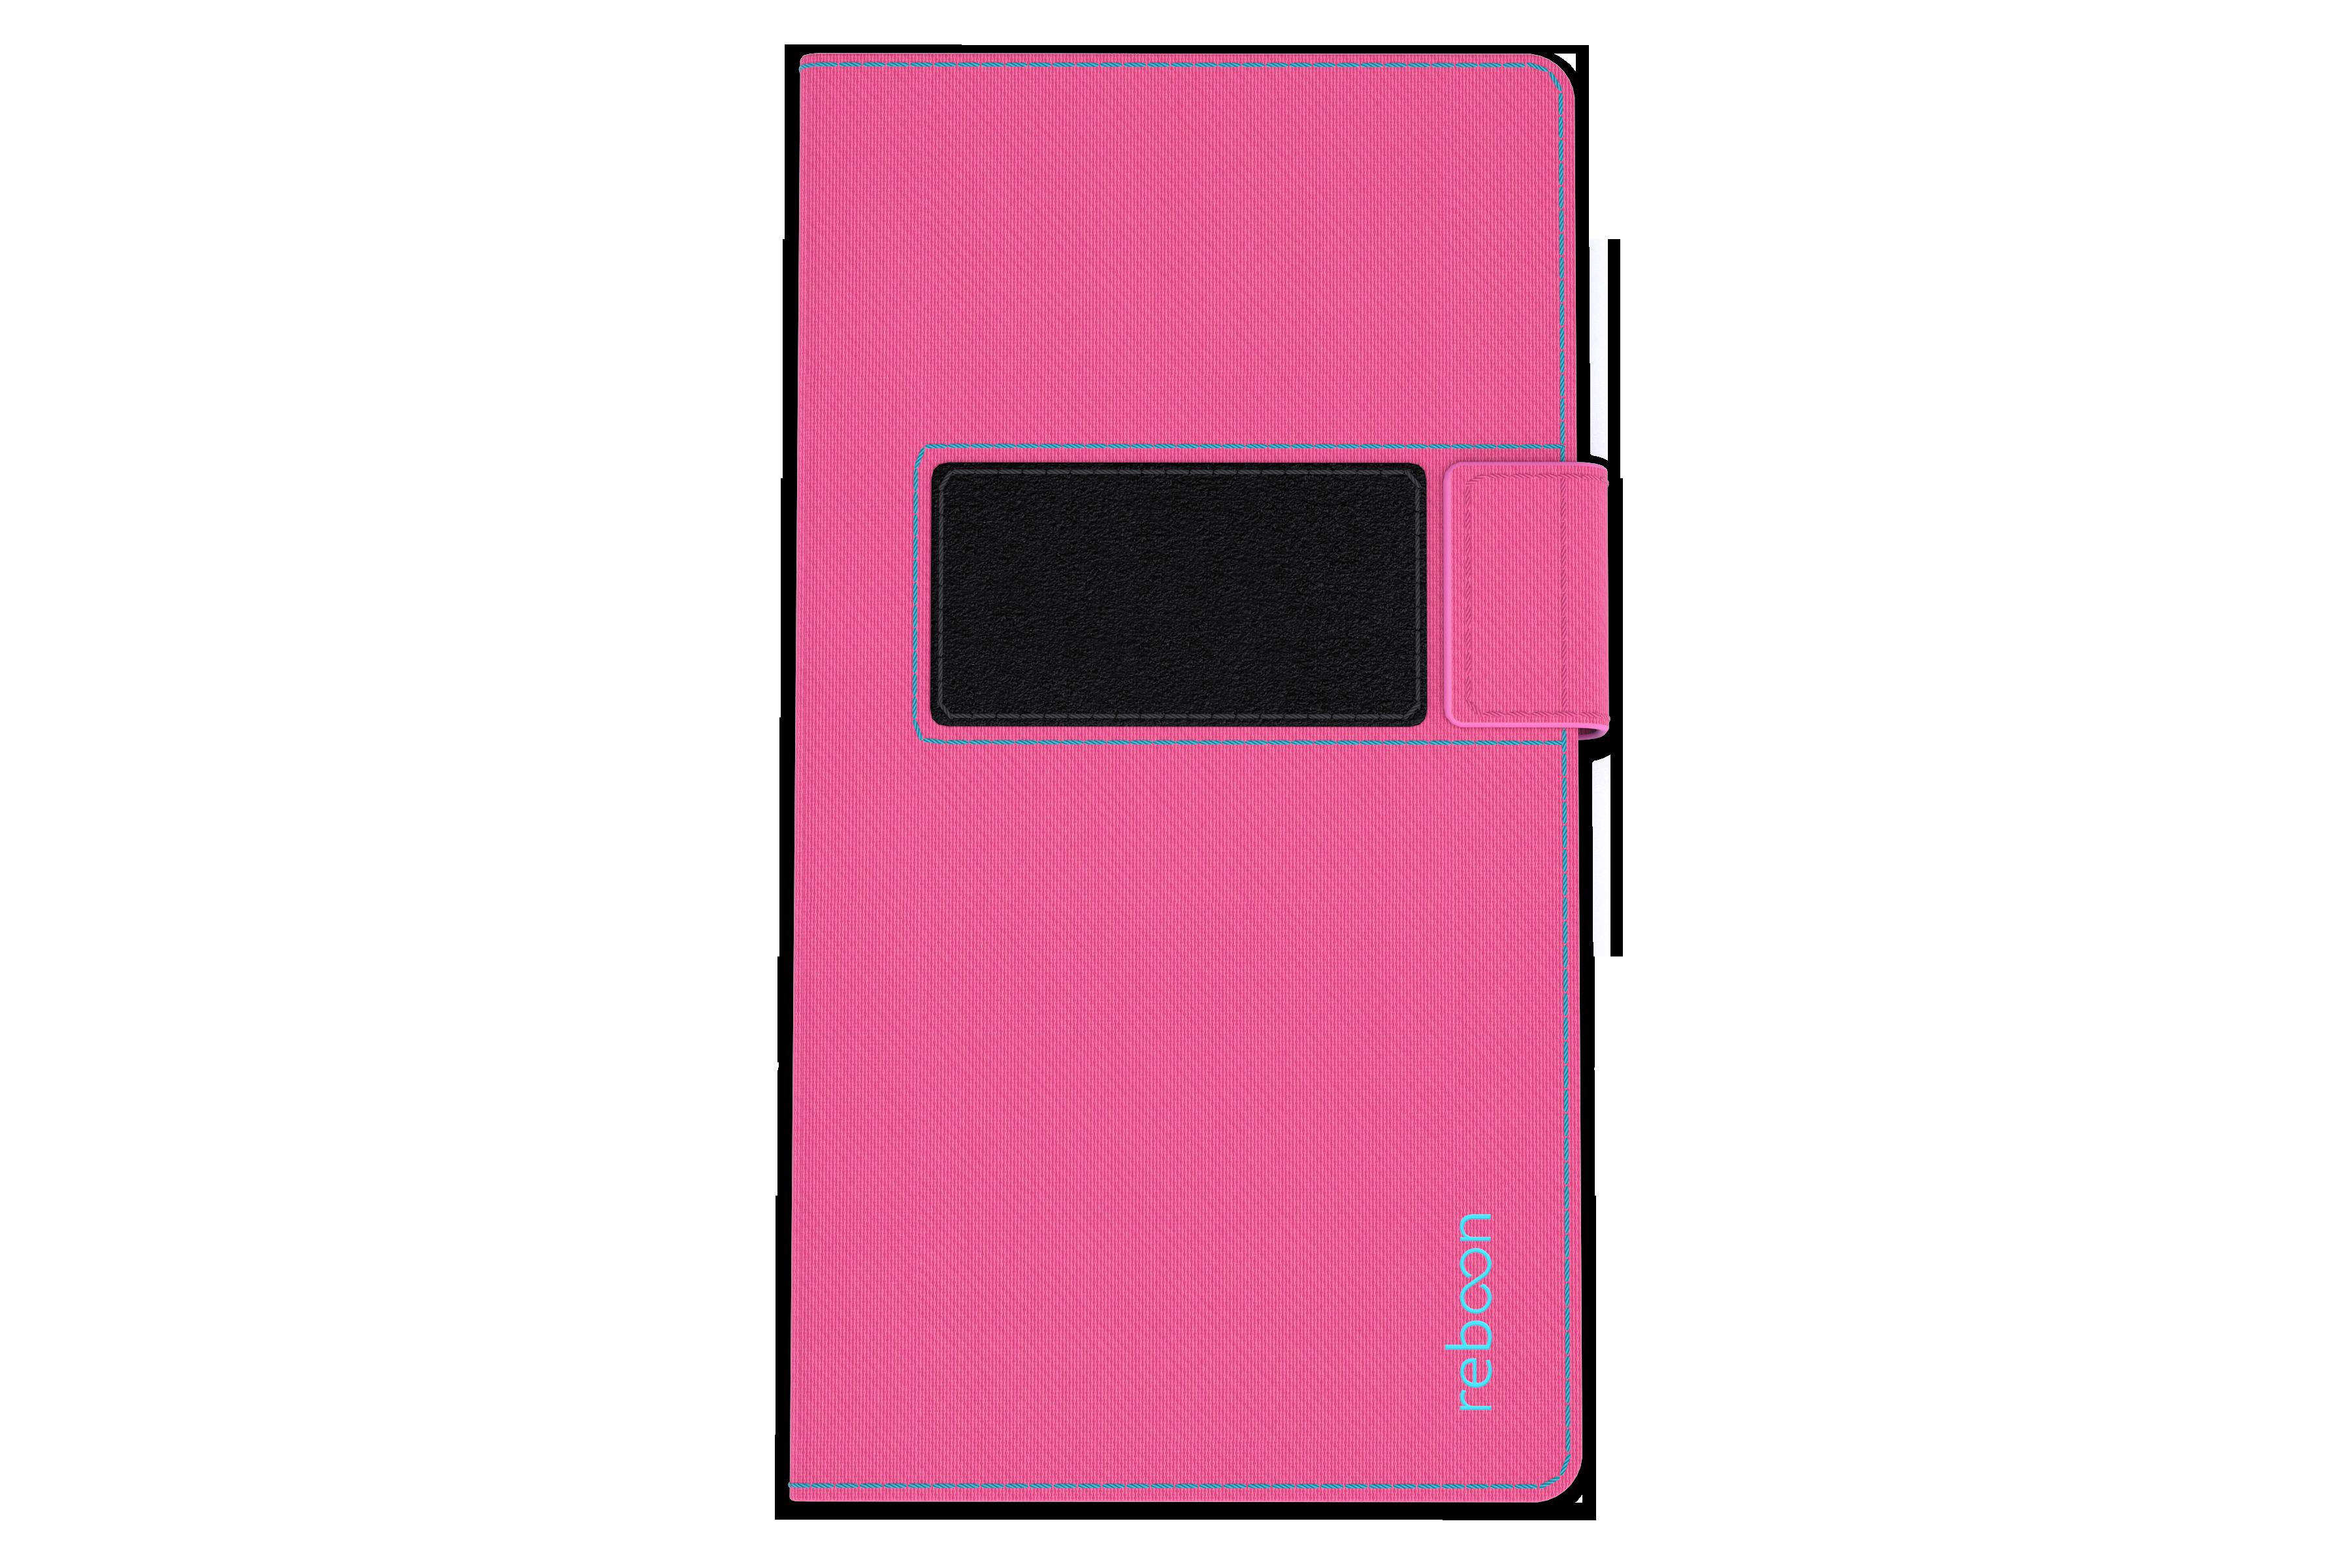 REBOON booncover XS2, Universal, Bookcover, Pink Universal